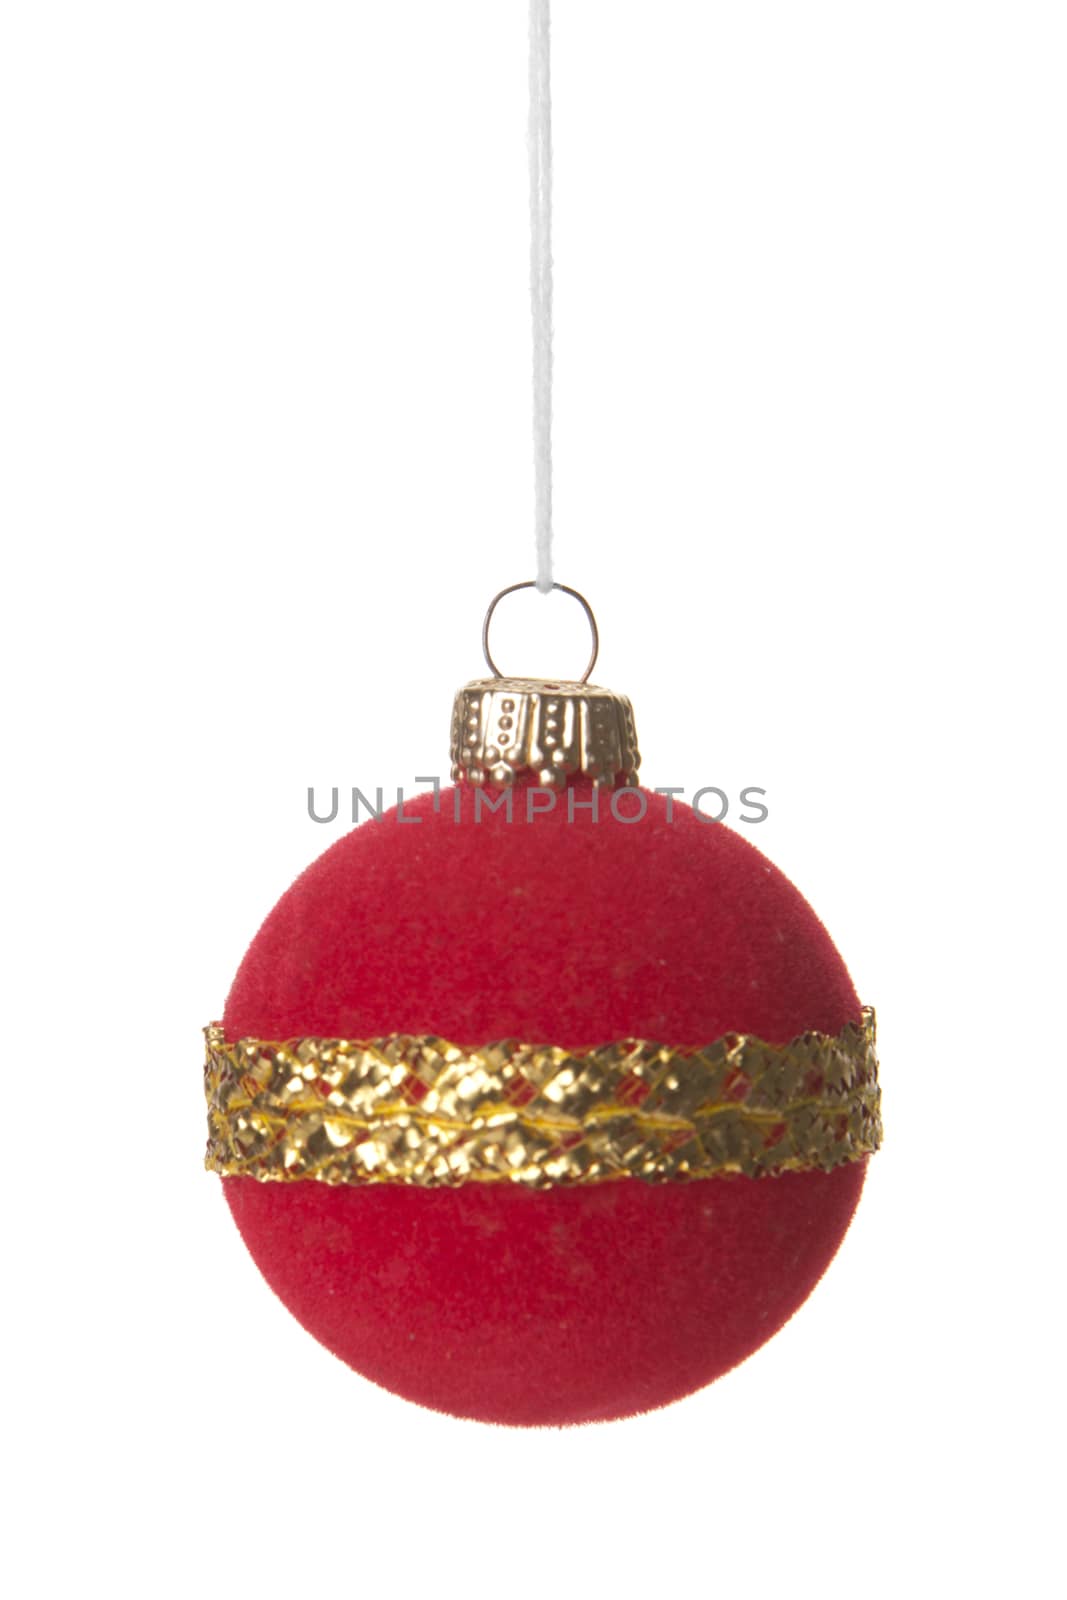 christmas baubles red with gold by Tomjac1980